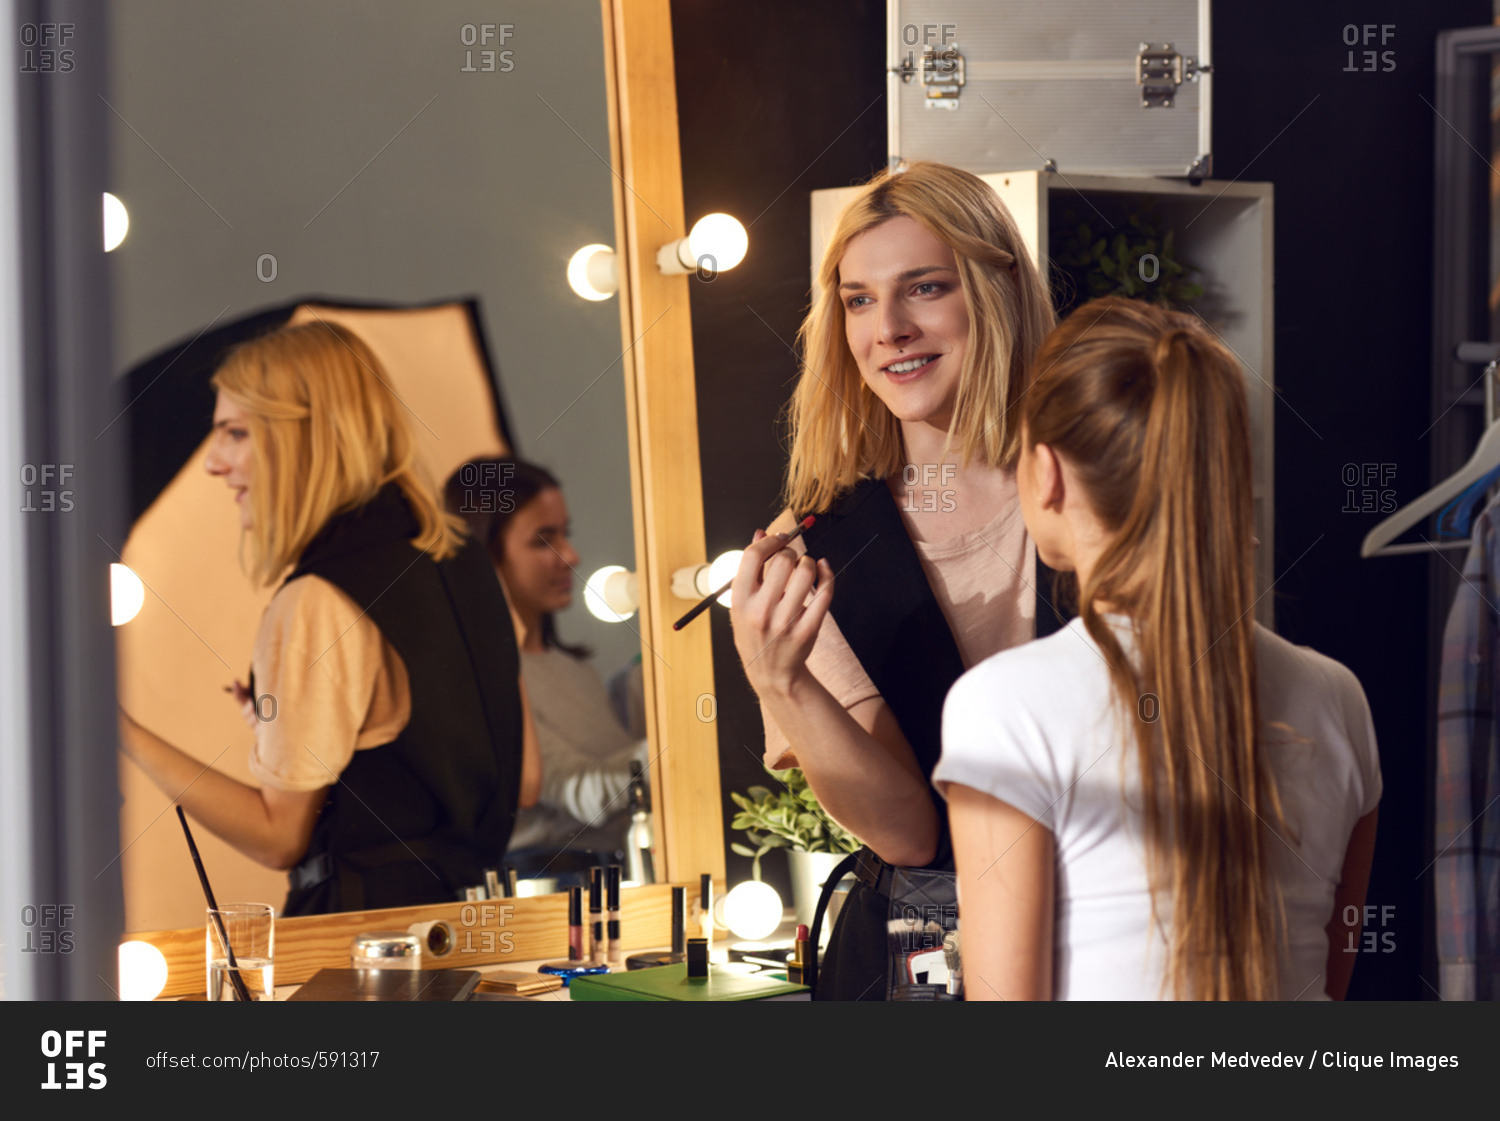 Transwoman in love with her profession. Young transgender make-up artist working with female model in studio and smiling cheerfully